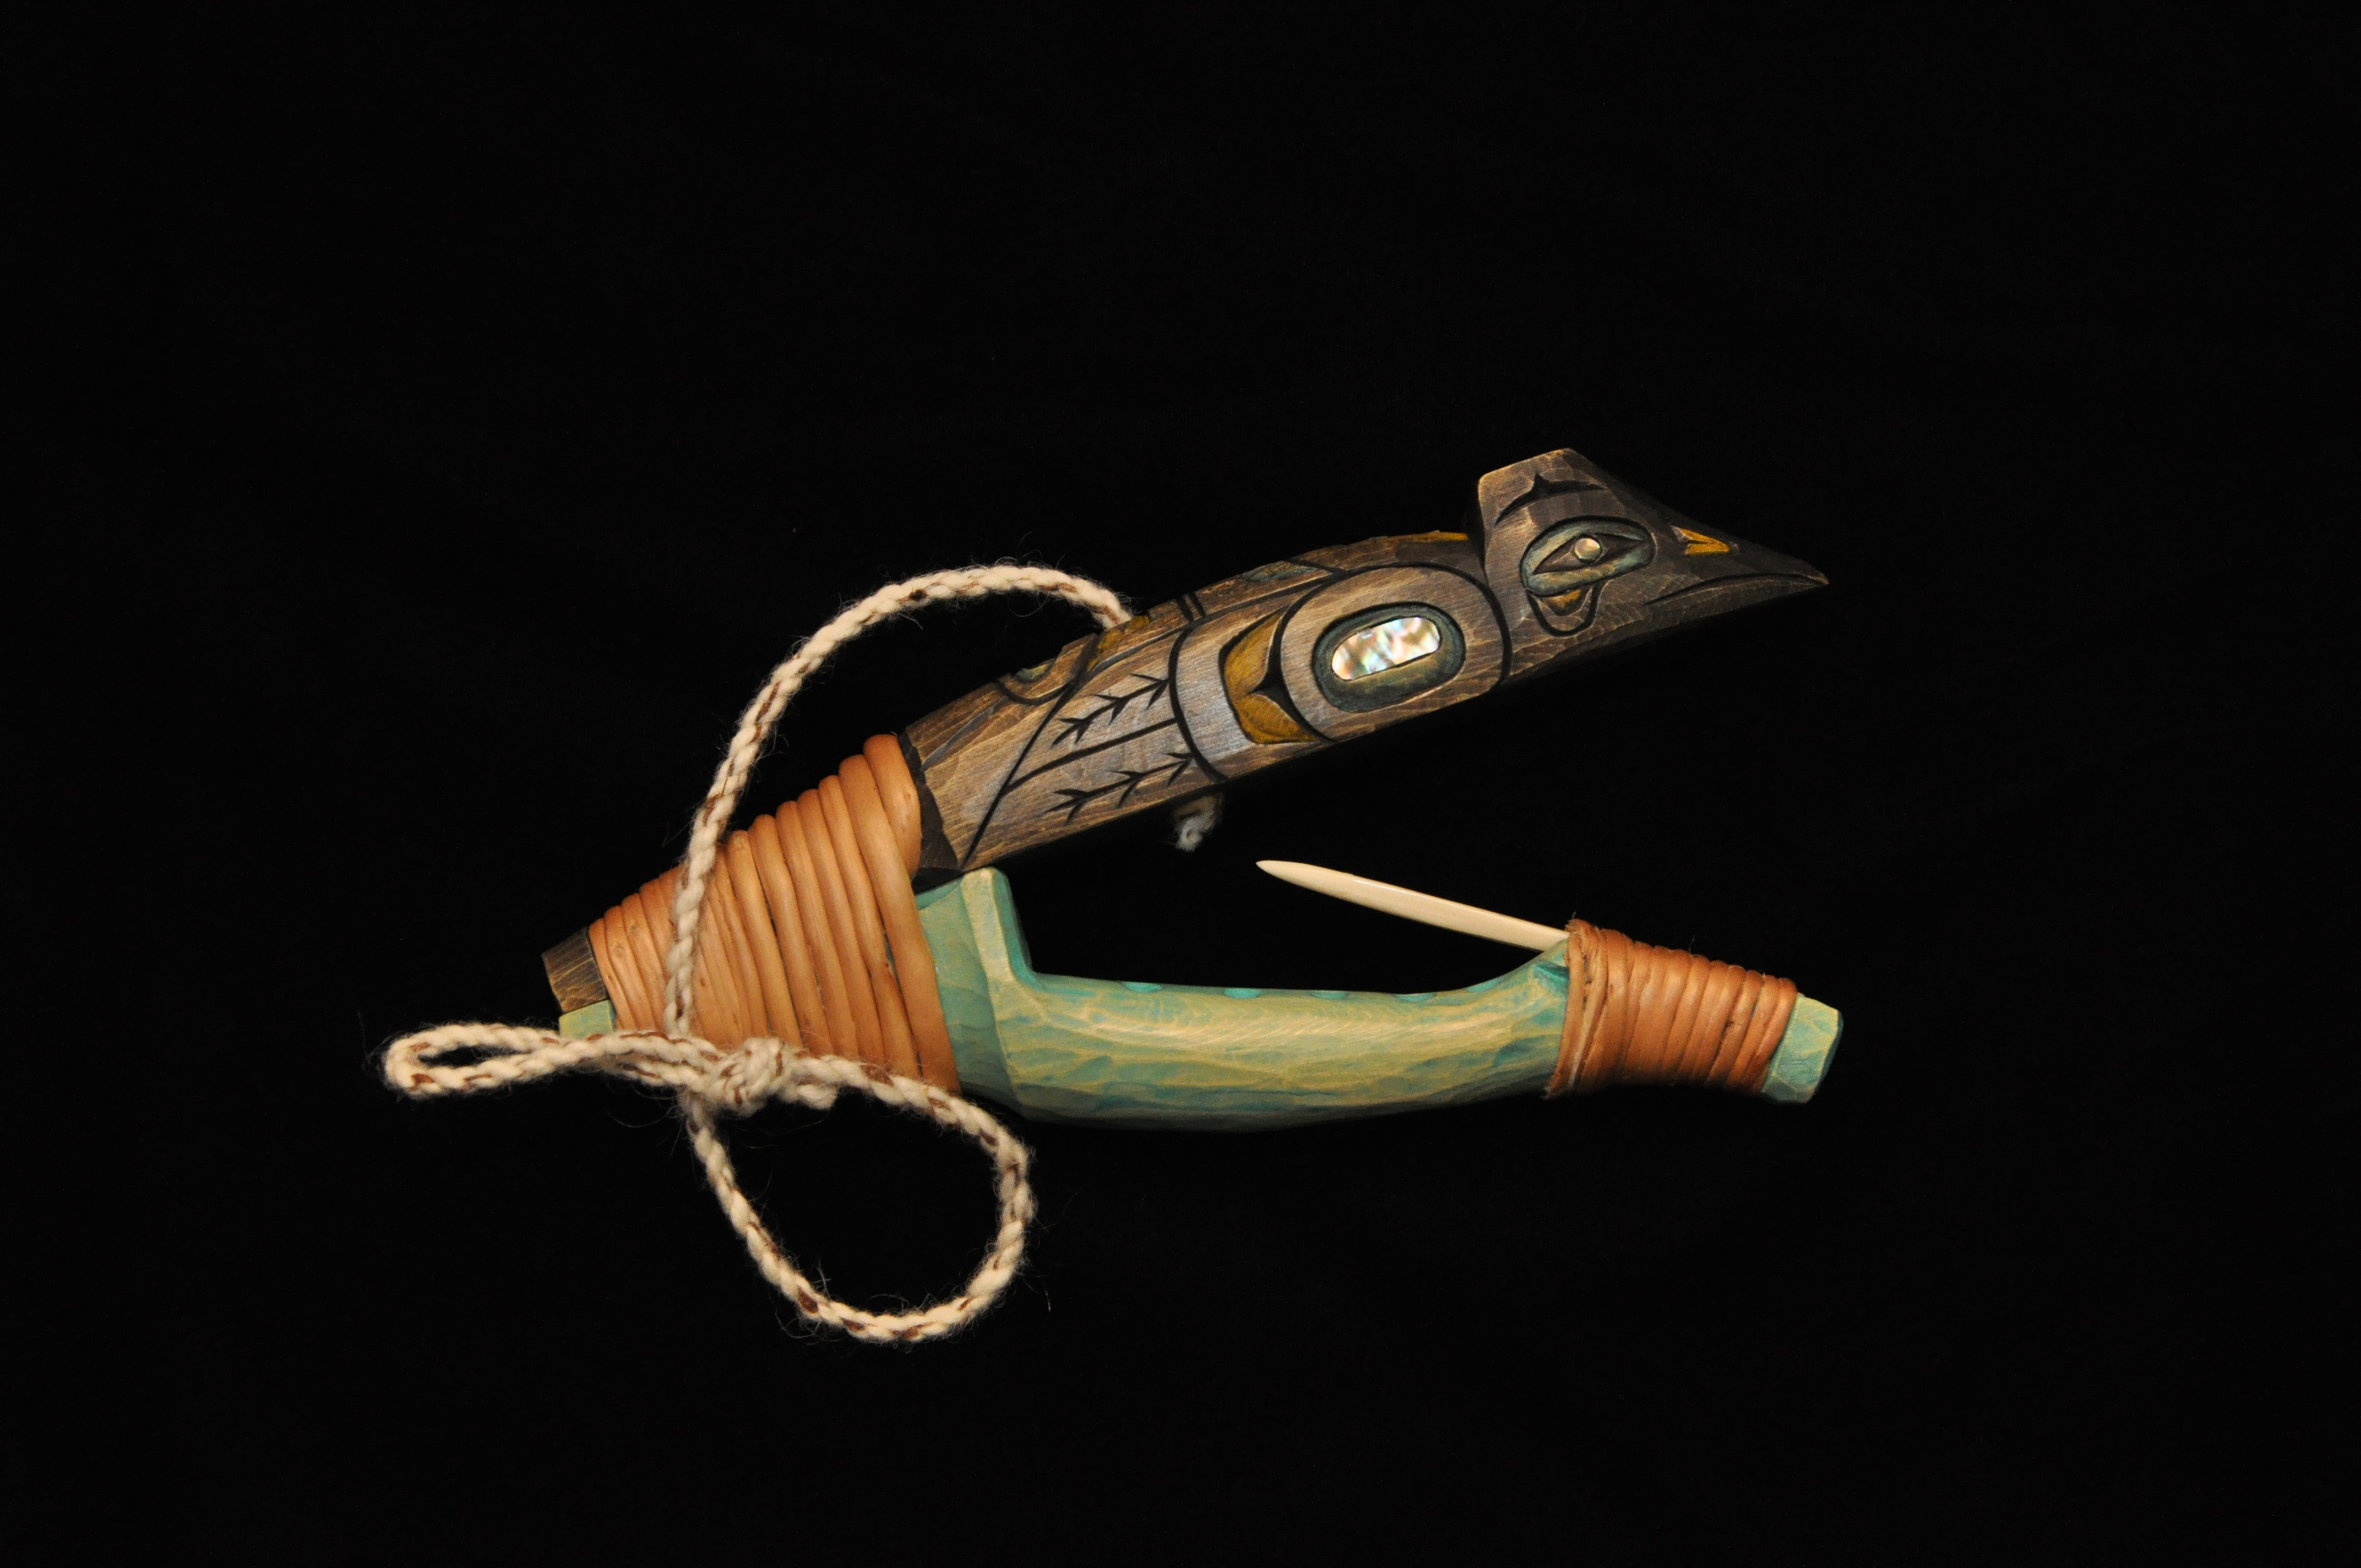 Halibut hook by Donald Gregory